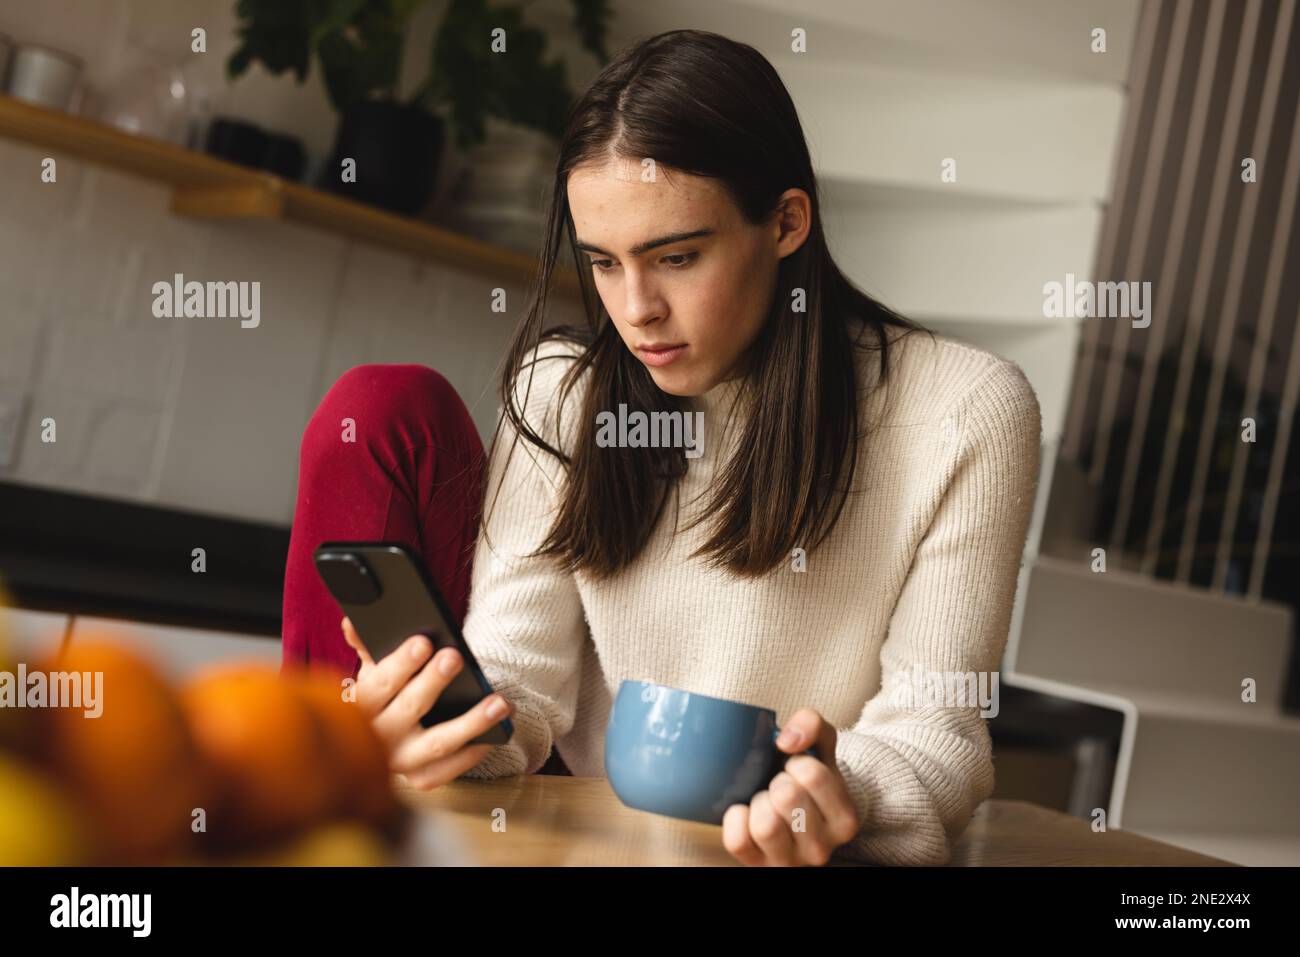 Non-binary trans woman holding a coffee cup using smartphone in the kitchen at home. concept of gender fluidity Stock Photo